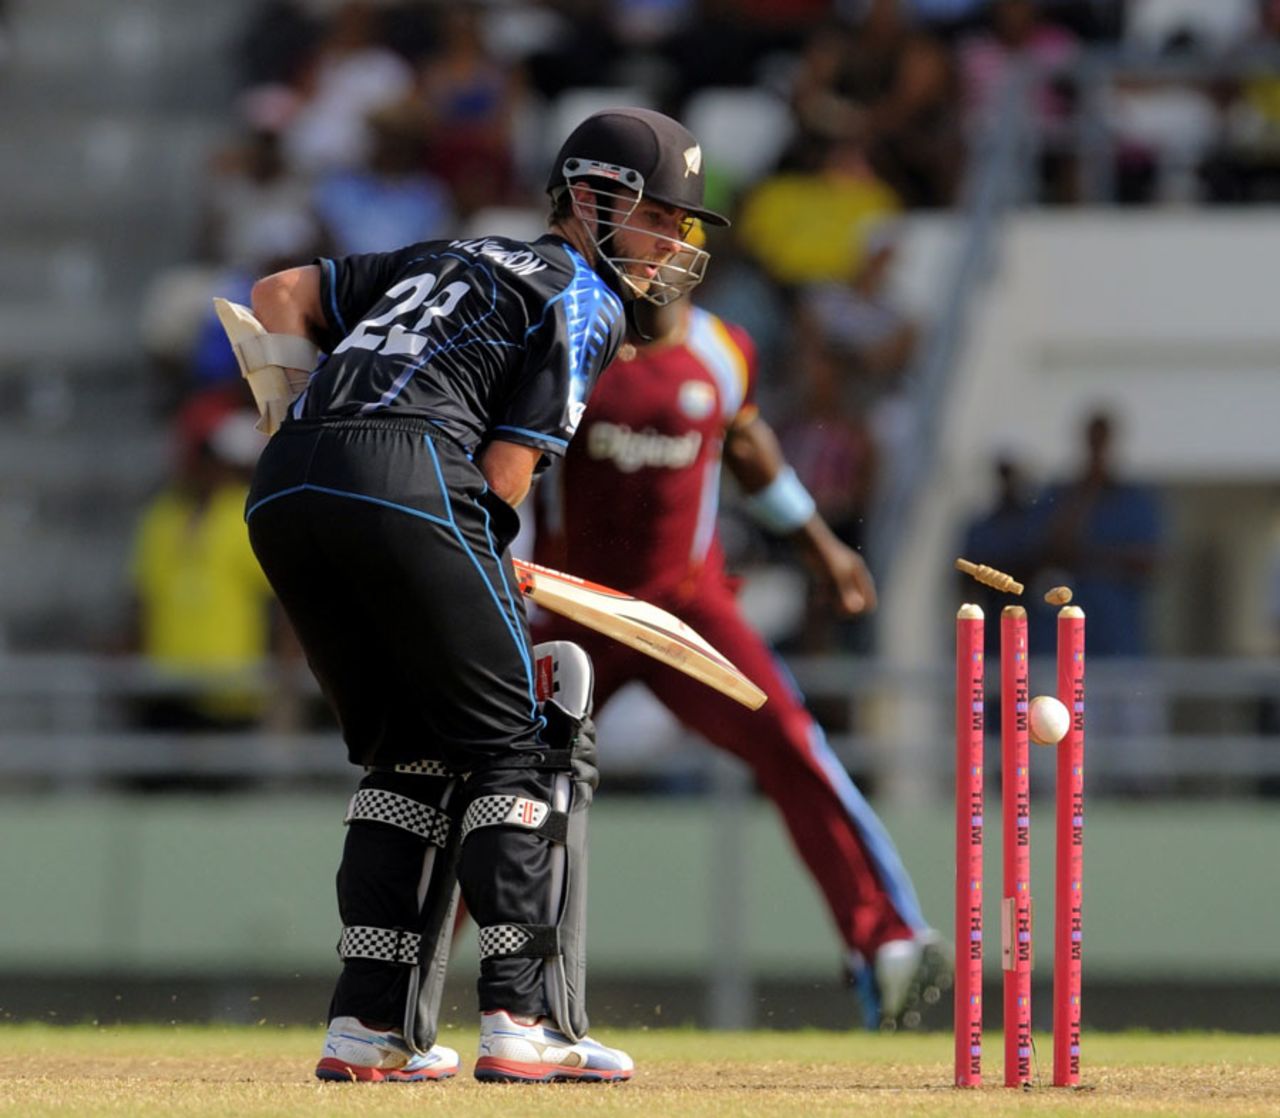 Kane Williamson was bowled by Kieron Pollard for 37, West Indies v New Zealand, 2nd T20I, Dominica, July 6, 2014